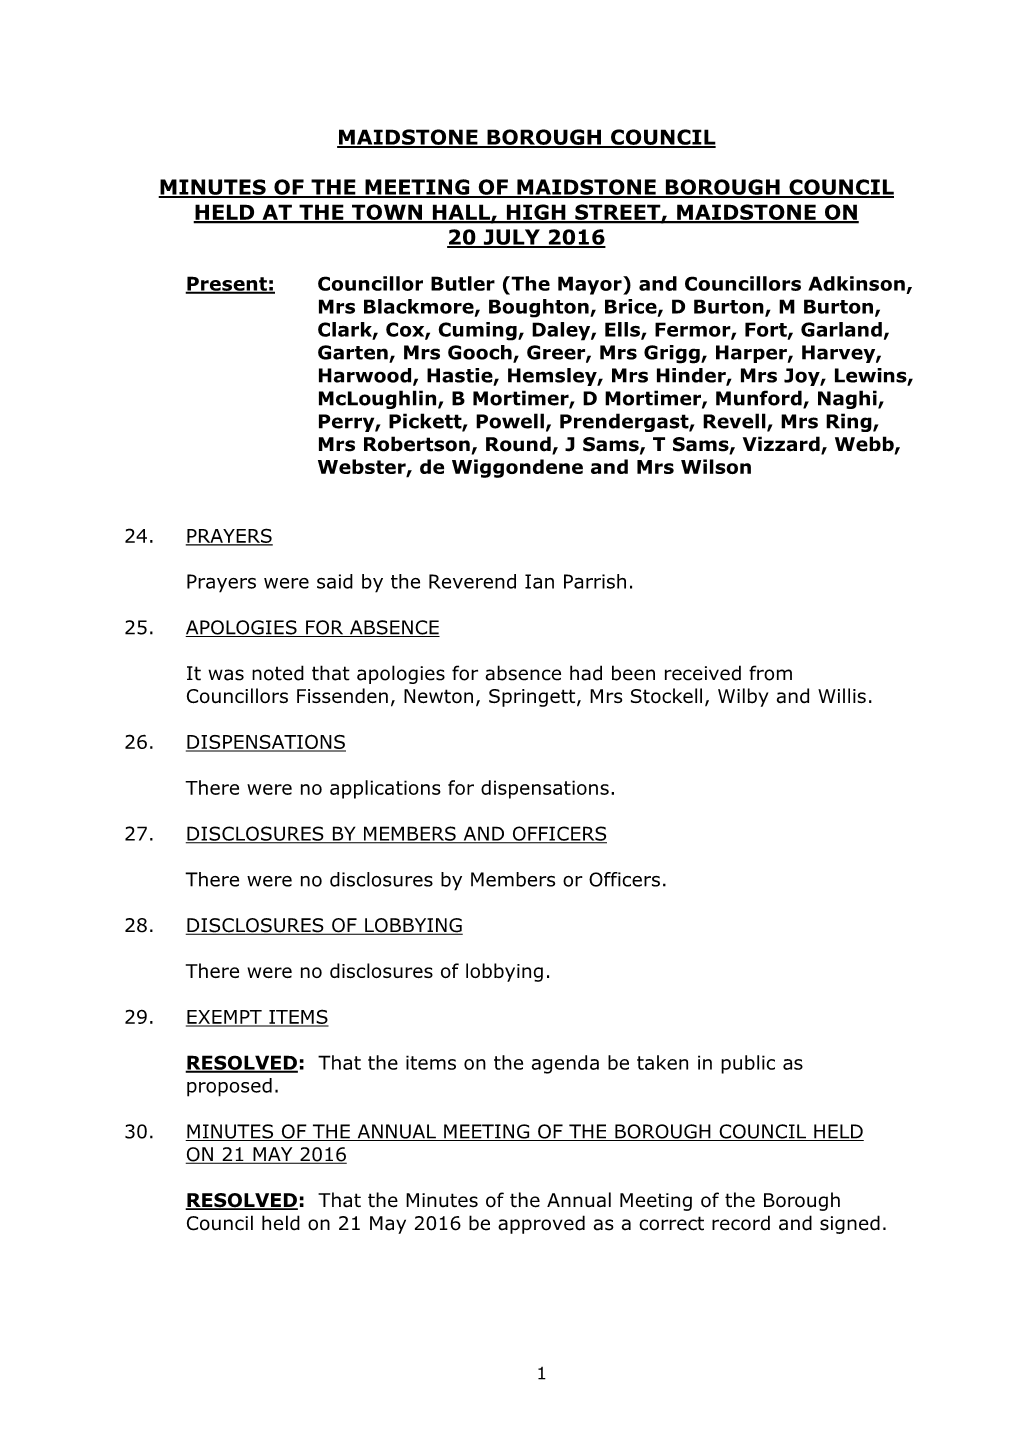 Maidstone Borough Council Minutes of the Meeting Of